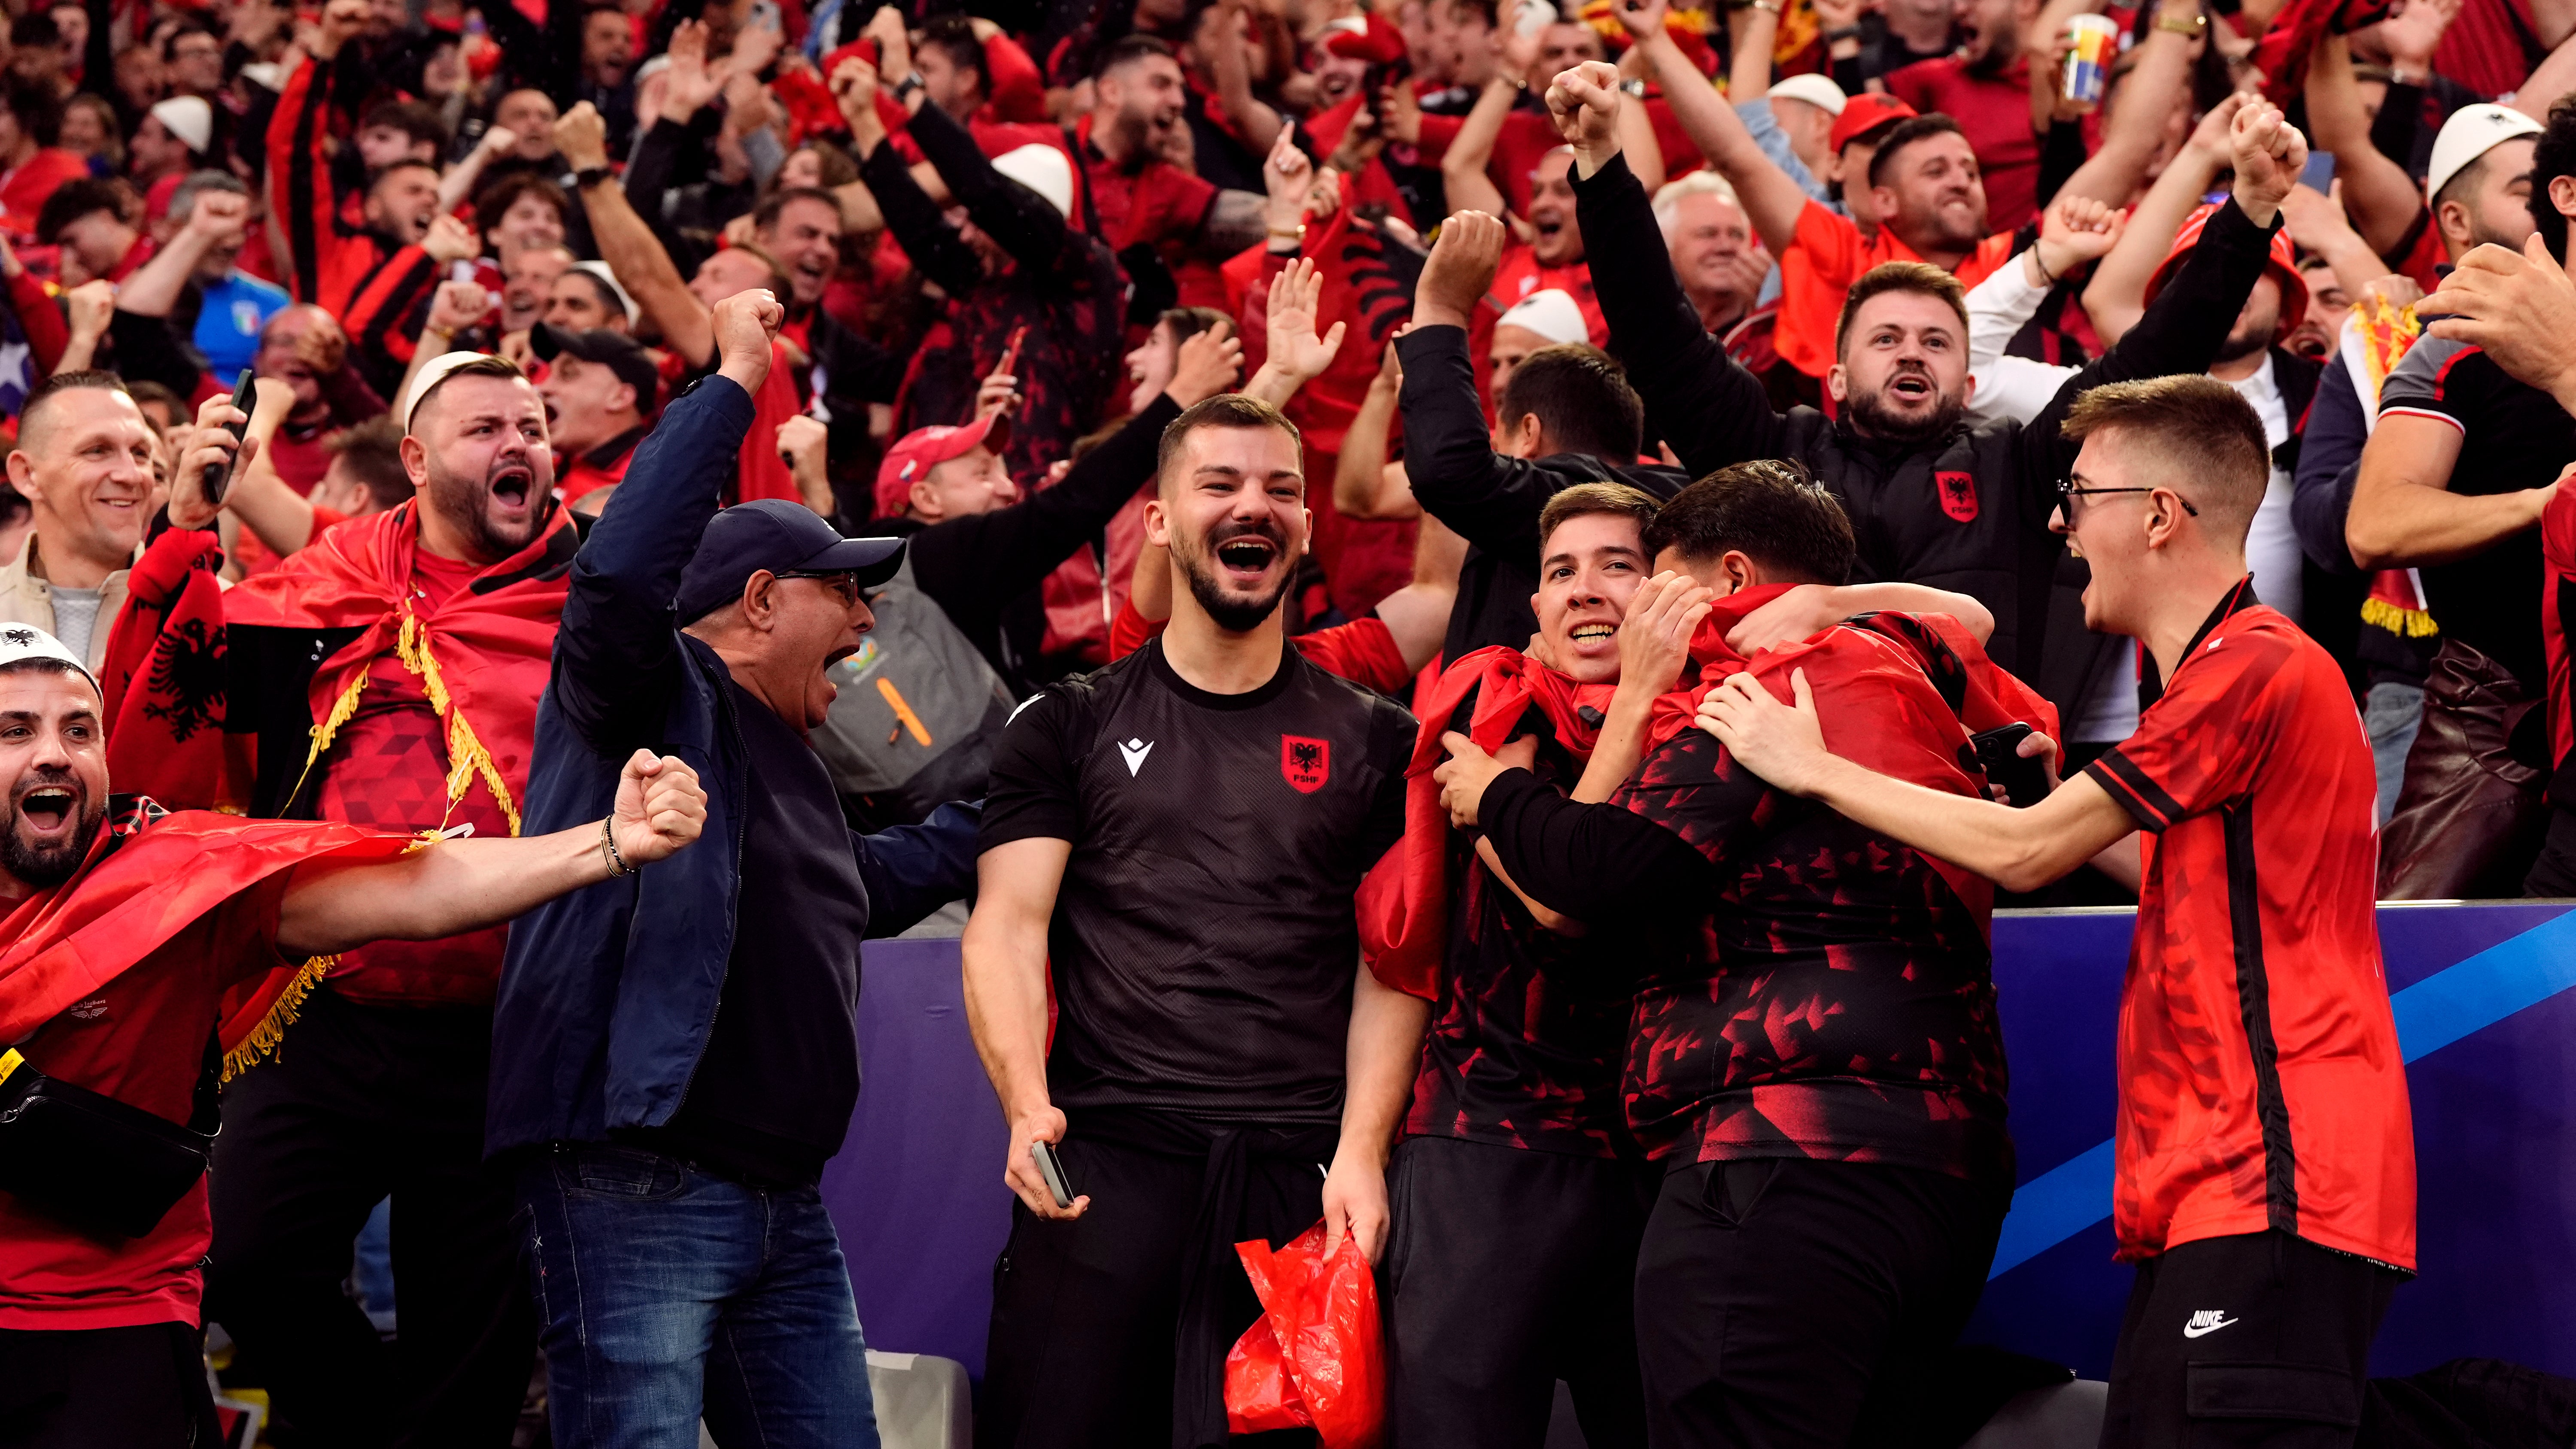 Albanian fans go crazy after their team’s record-breaking goal